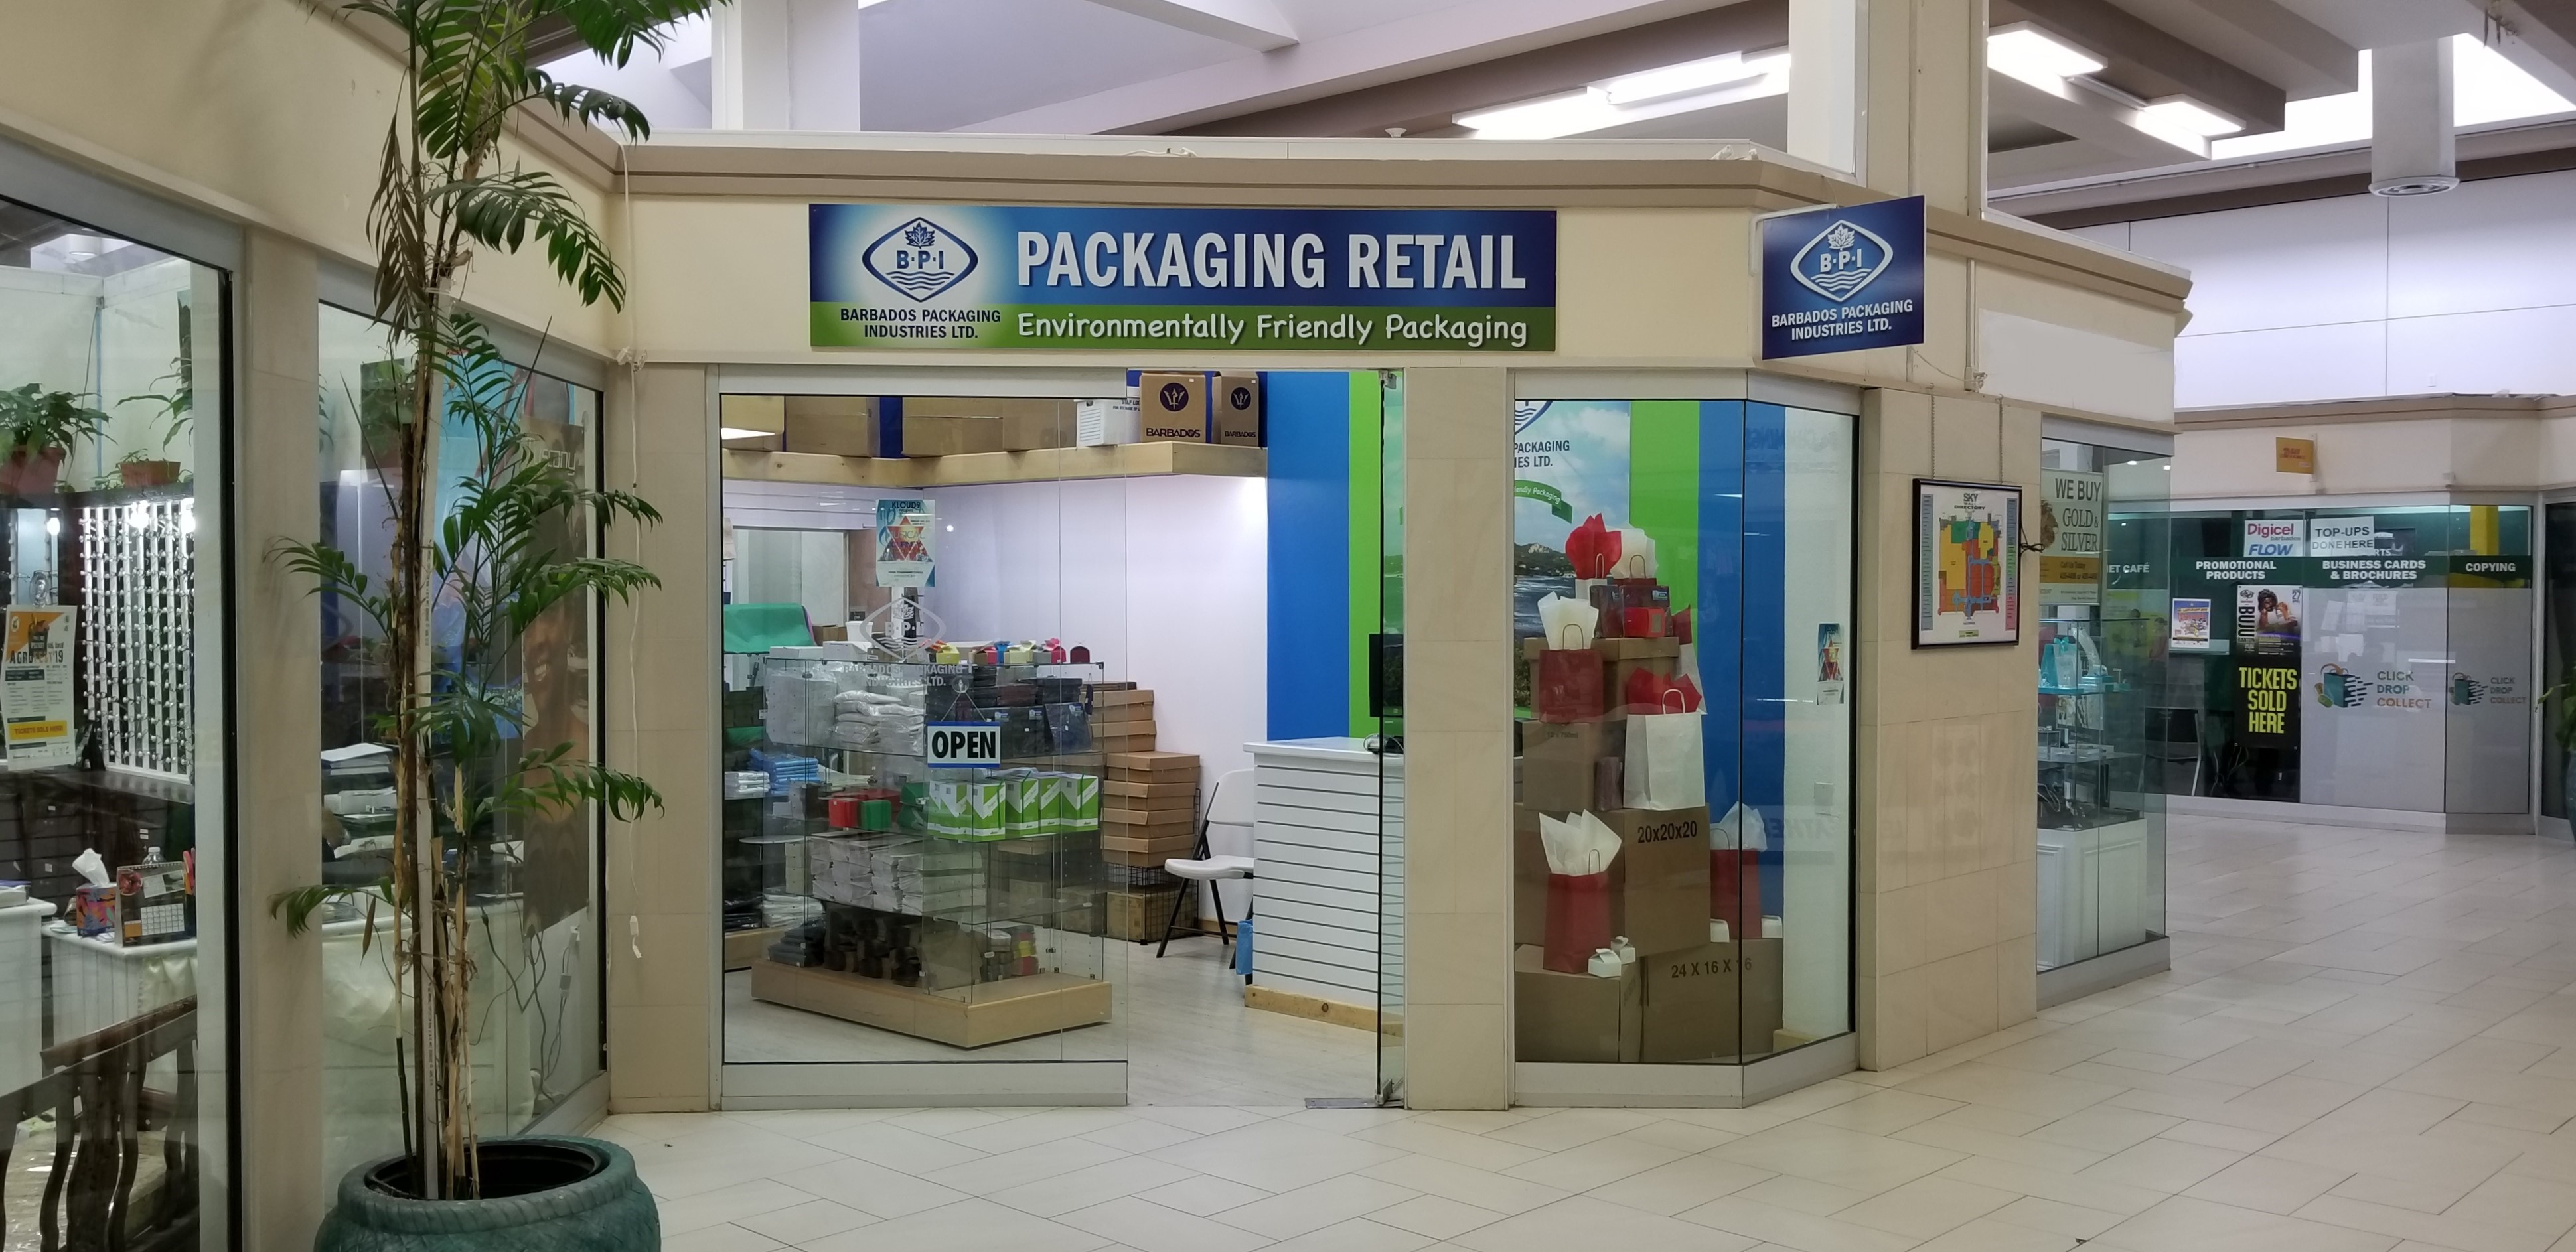 Image of BPIL retail store